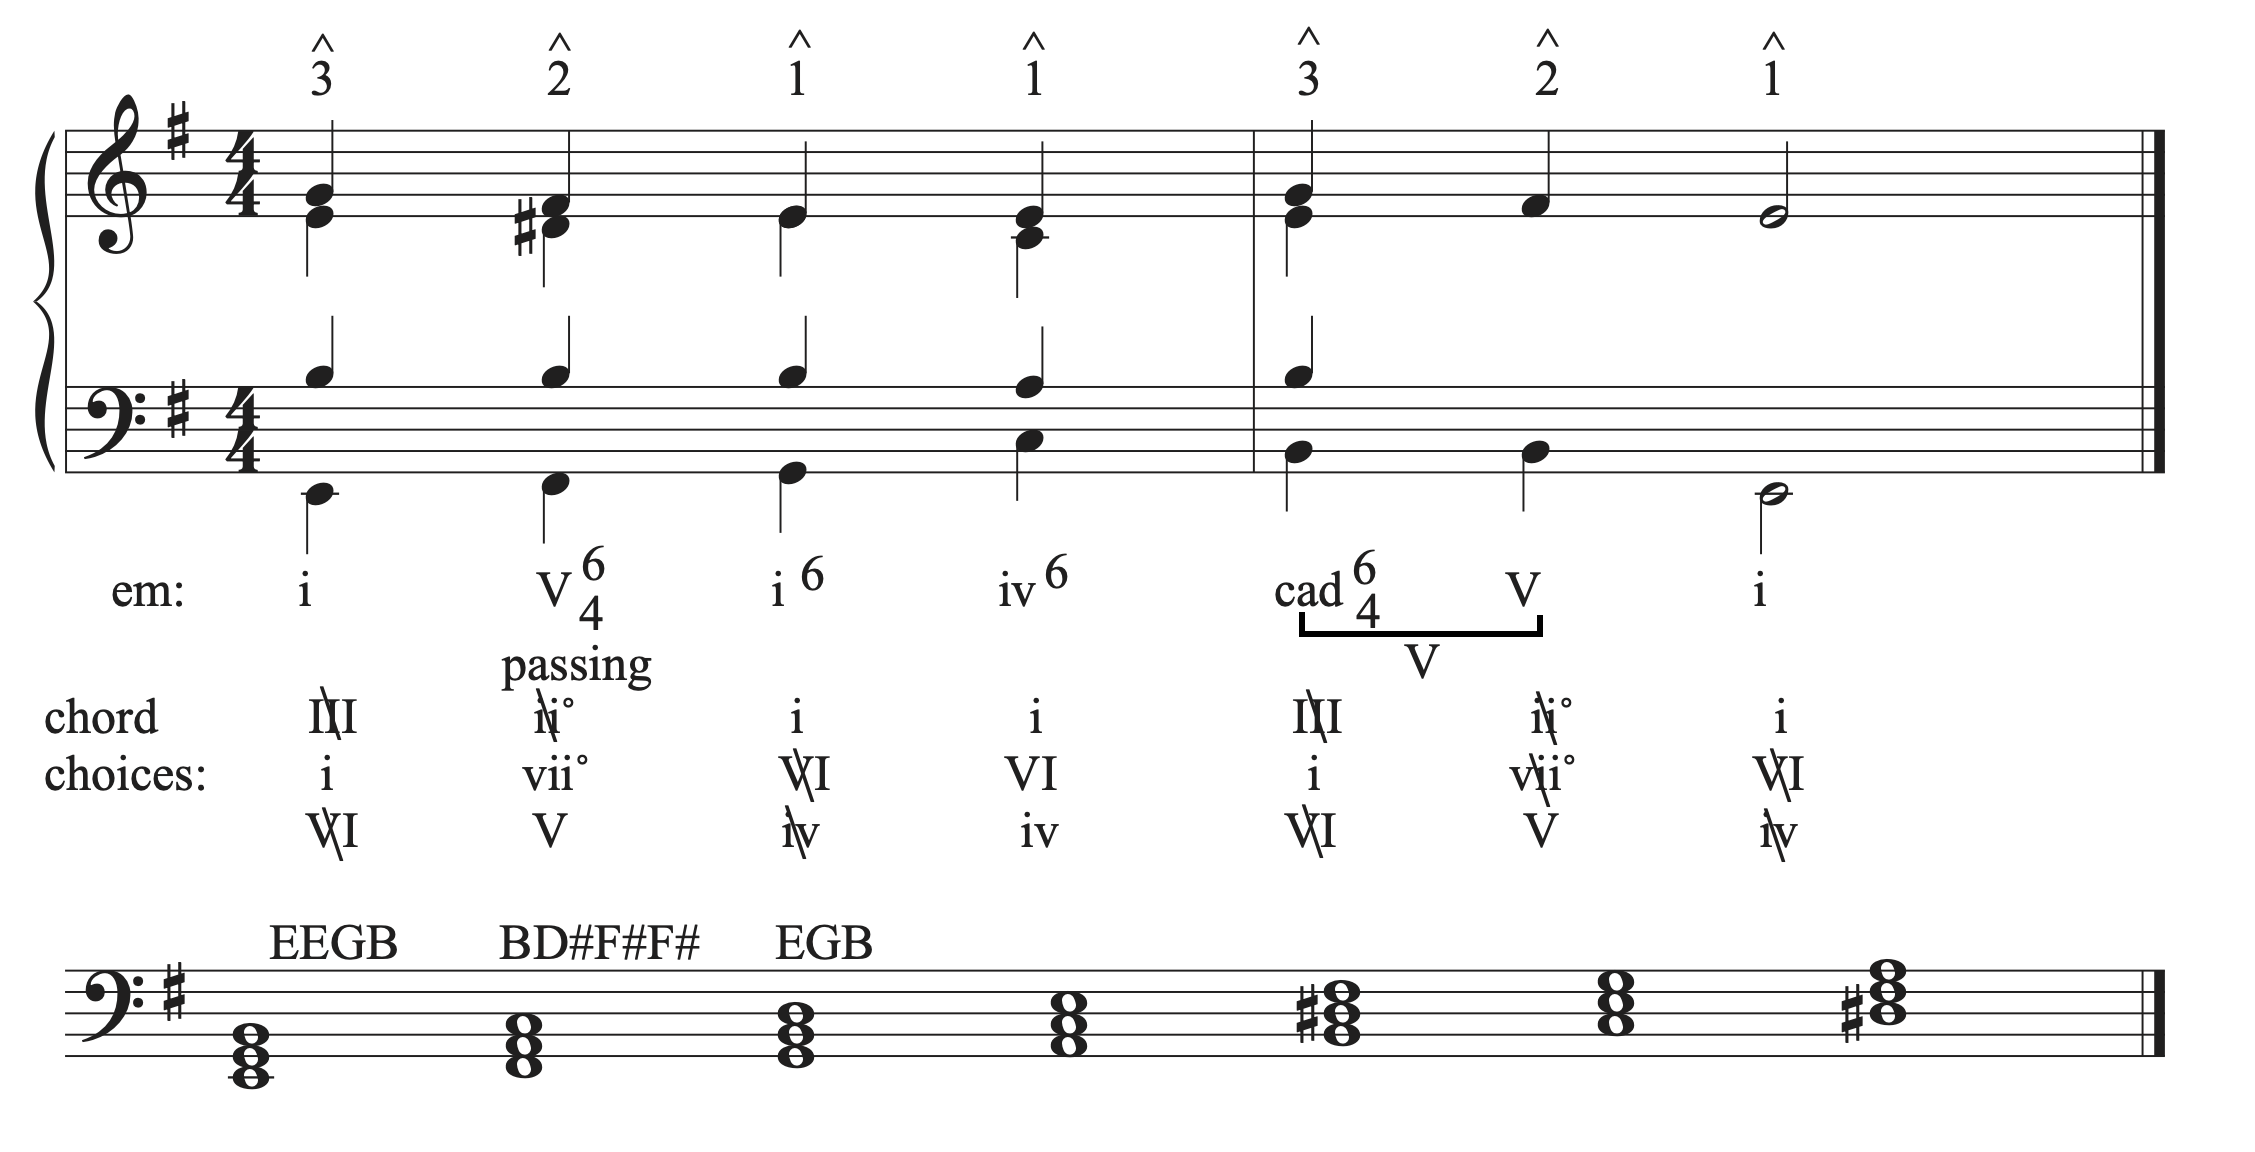 The musical example in G major with the elimination of parallel octaves.